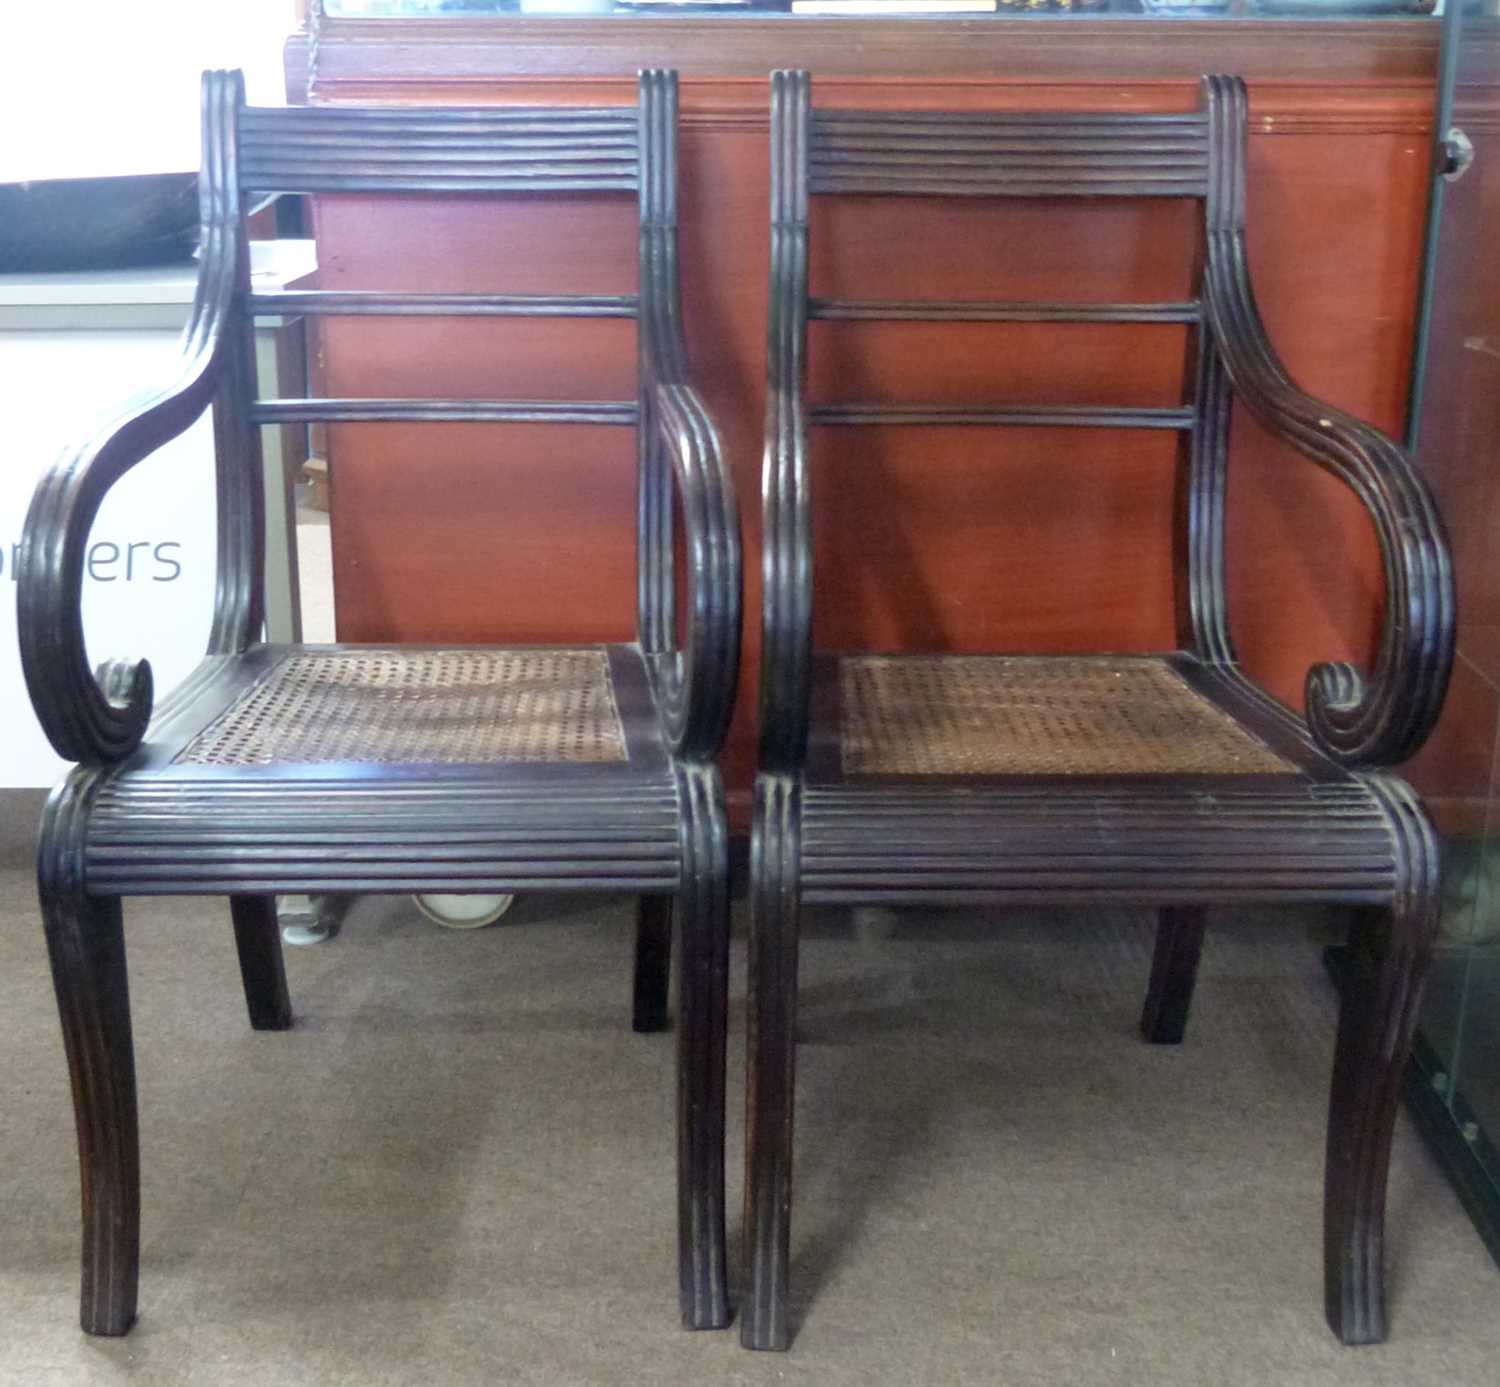 Pair of Georgian mahogany scroll arm chairs with cane seats and sabre type front legs decorated - Image 4 of 4